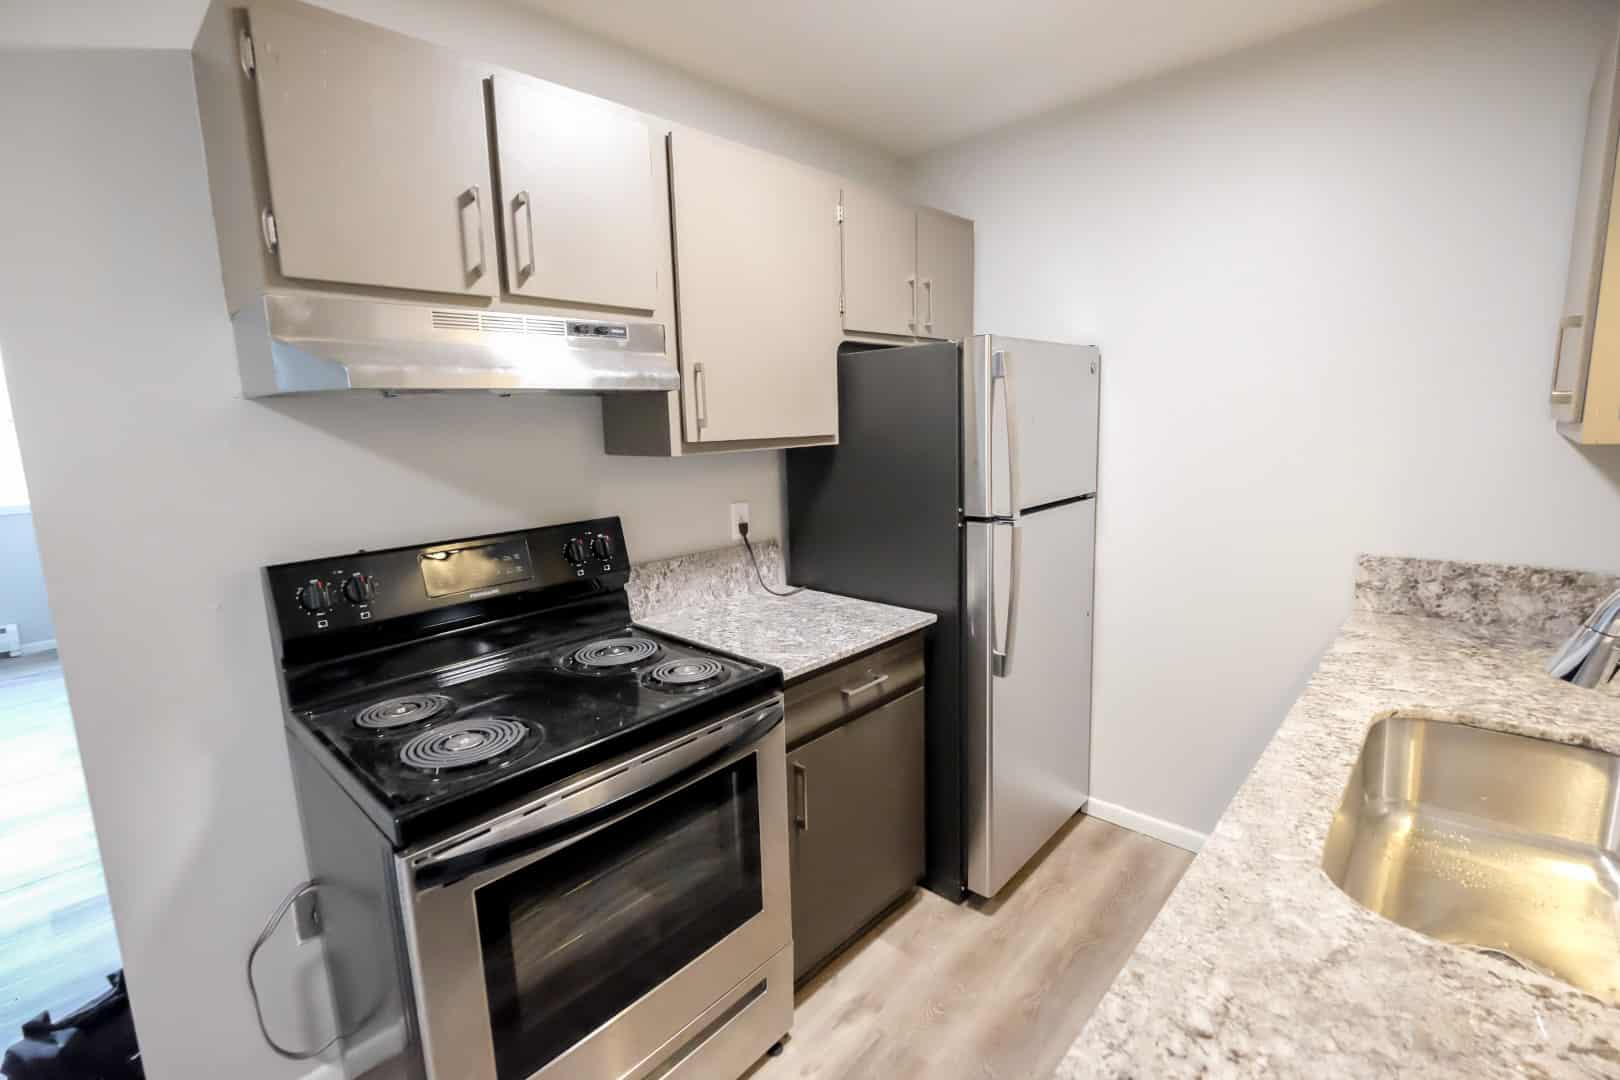 Enjoy delicious home-cooked males in this state-of-the-art kitchen featuring a full range and granite countertops. 